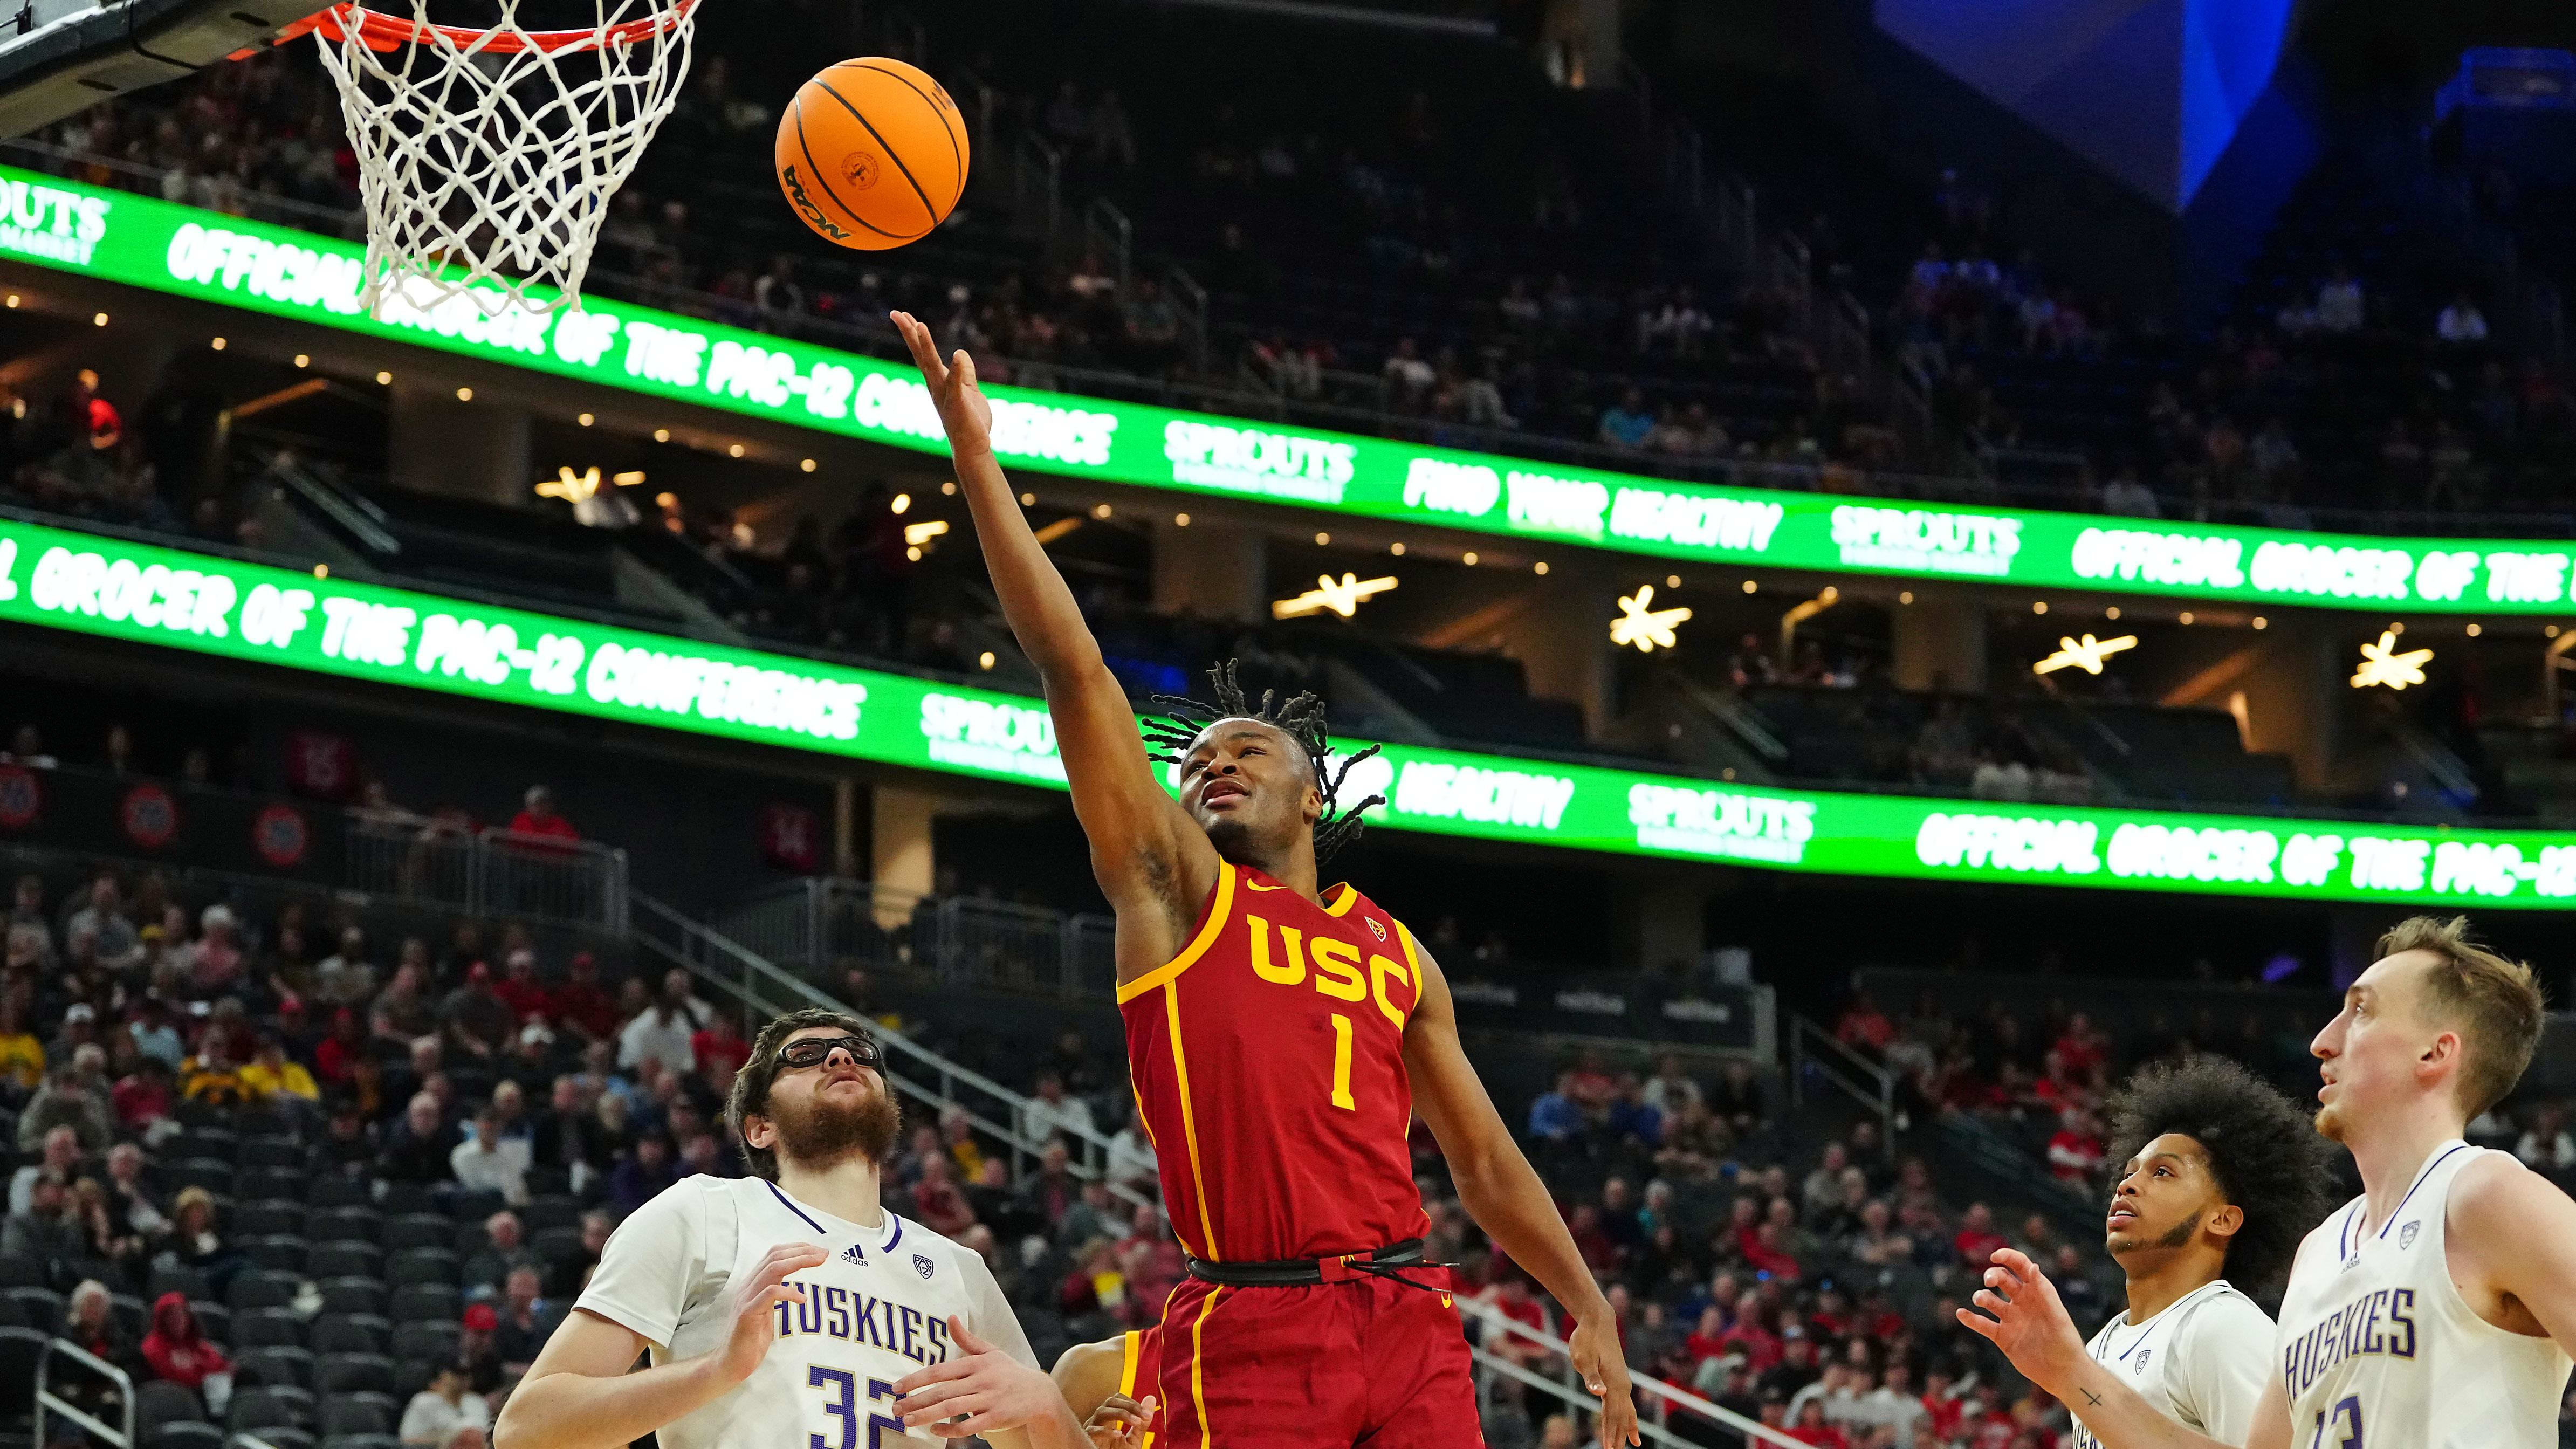 USC Point Guard Isaiah Collier’s NBA Draft Projection and Miami Heat’s Interest